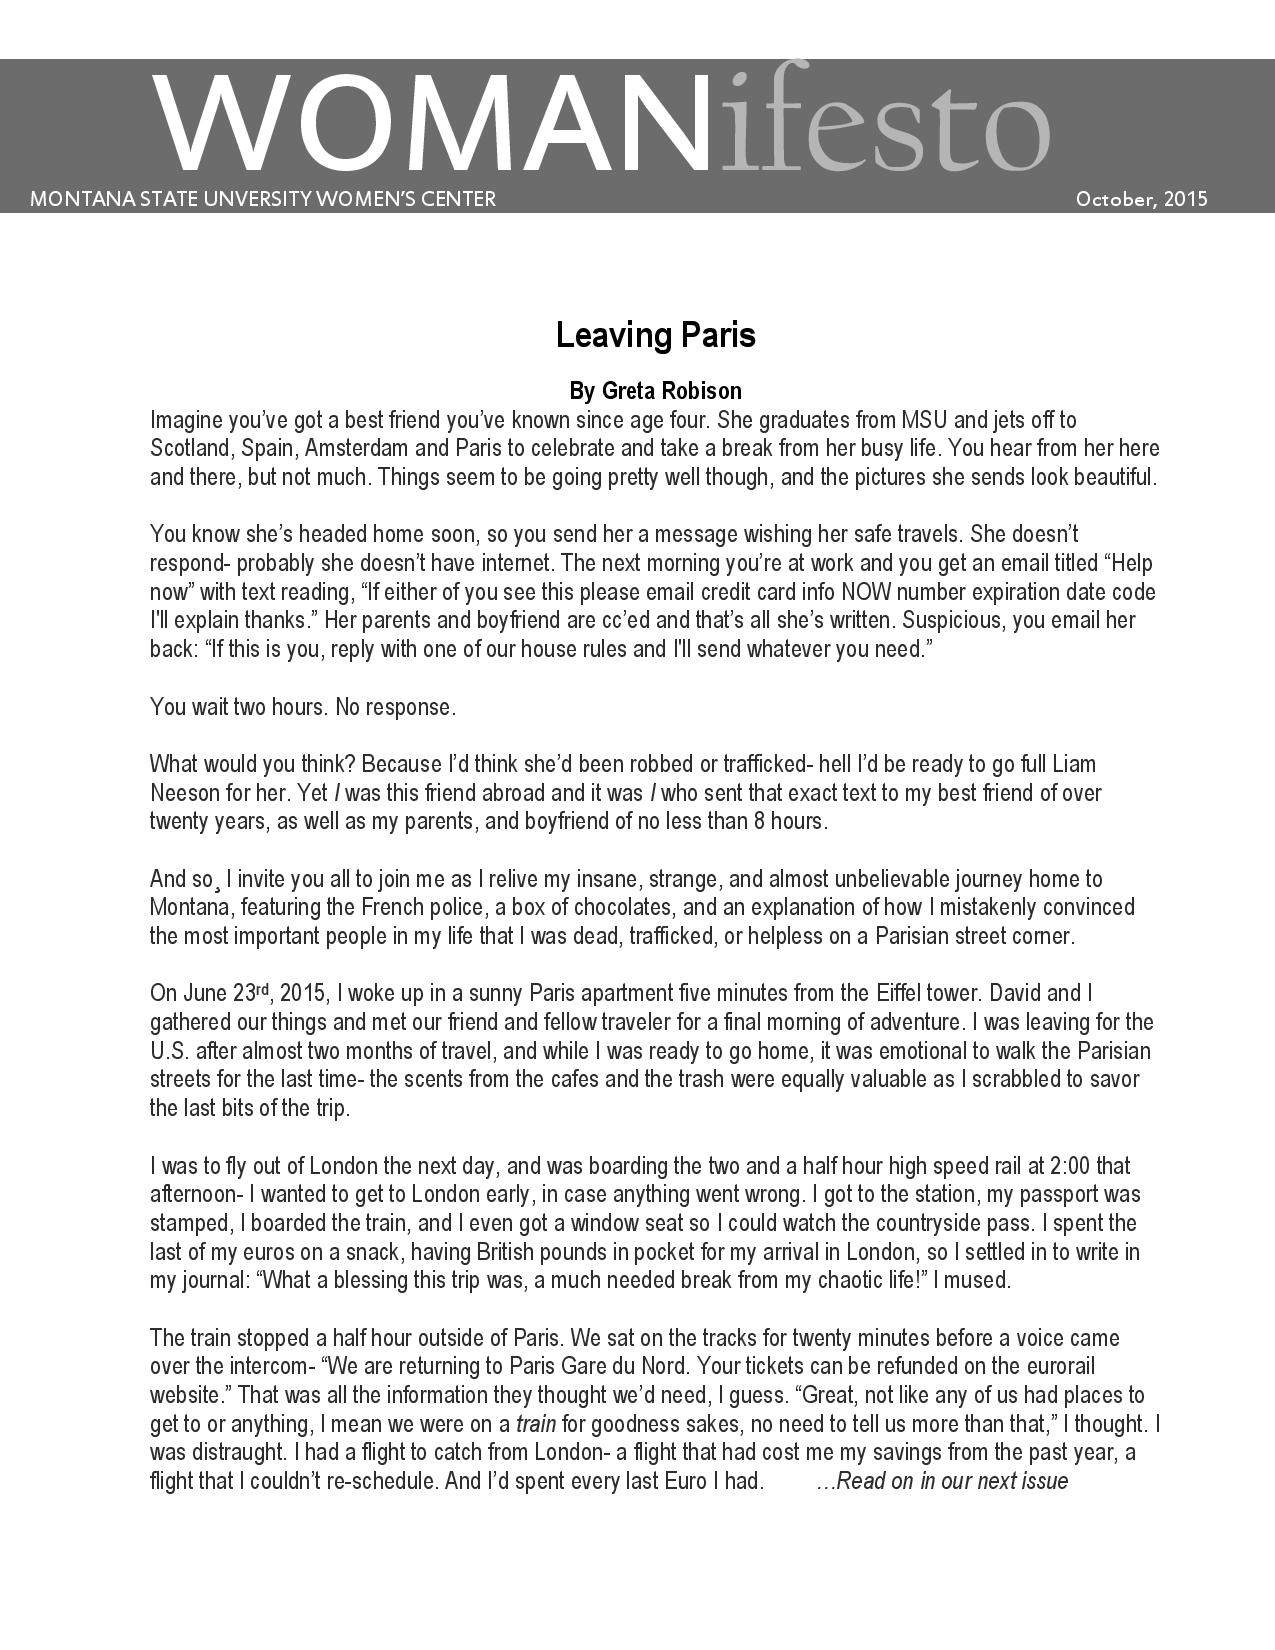 page 4 of newsletter. Contact women's center for word document copy.